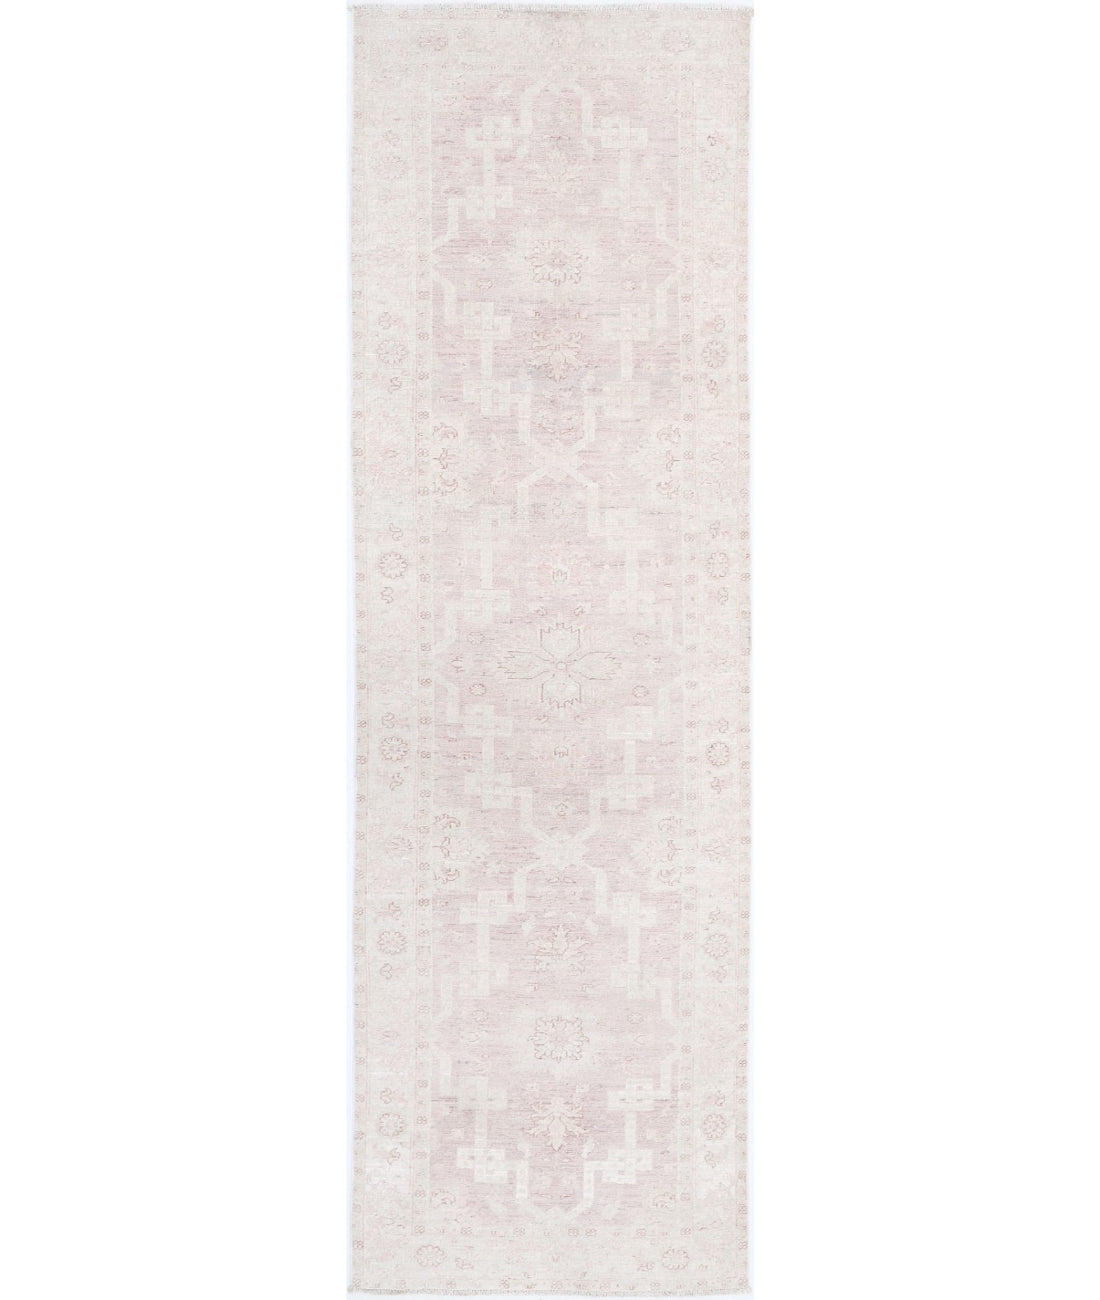 Hand Knotted Serenity Wool Rug - 2&#39;6&#39;&#39; x 8&#39;11&#39;&#39; 2&#39;6&#39;&#39; x 8&#39;11&#39;&#39; (75 X 268) / Pink / Ivory